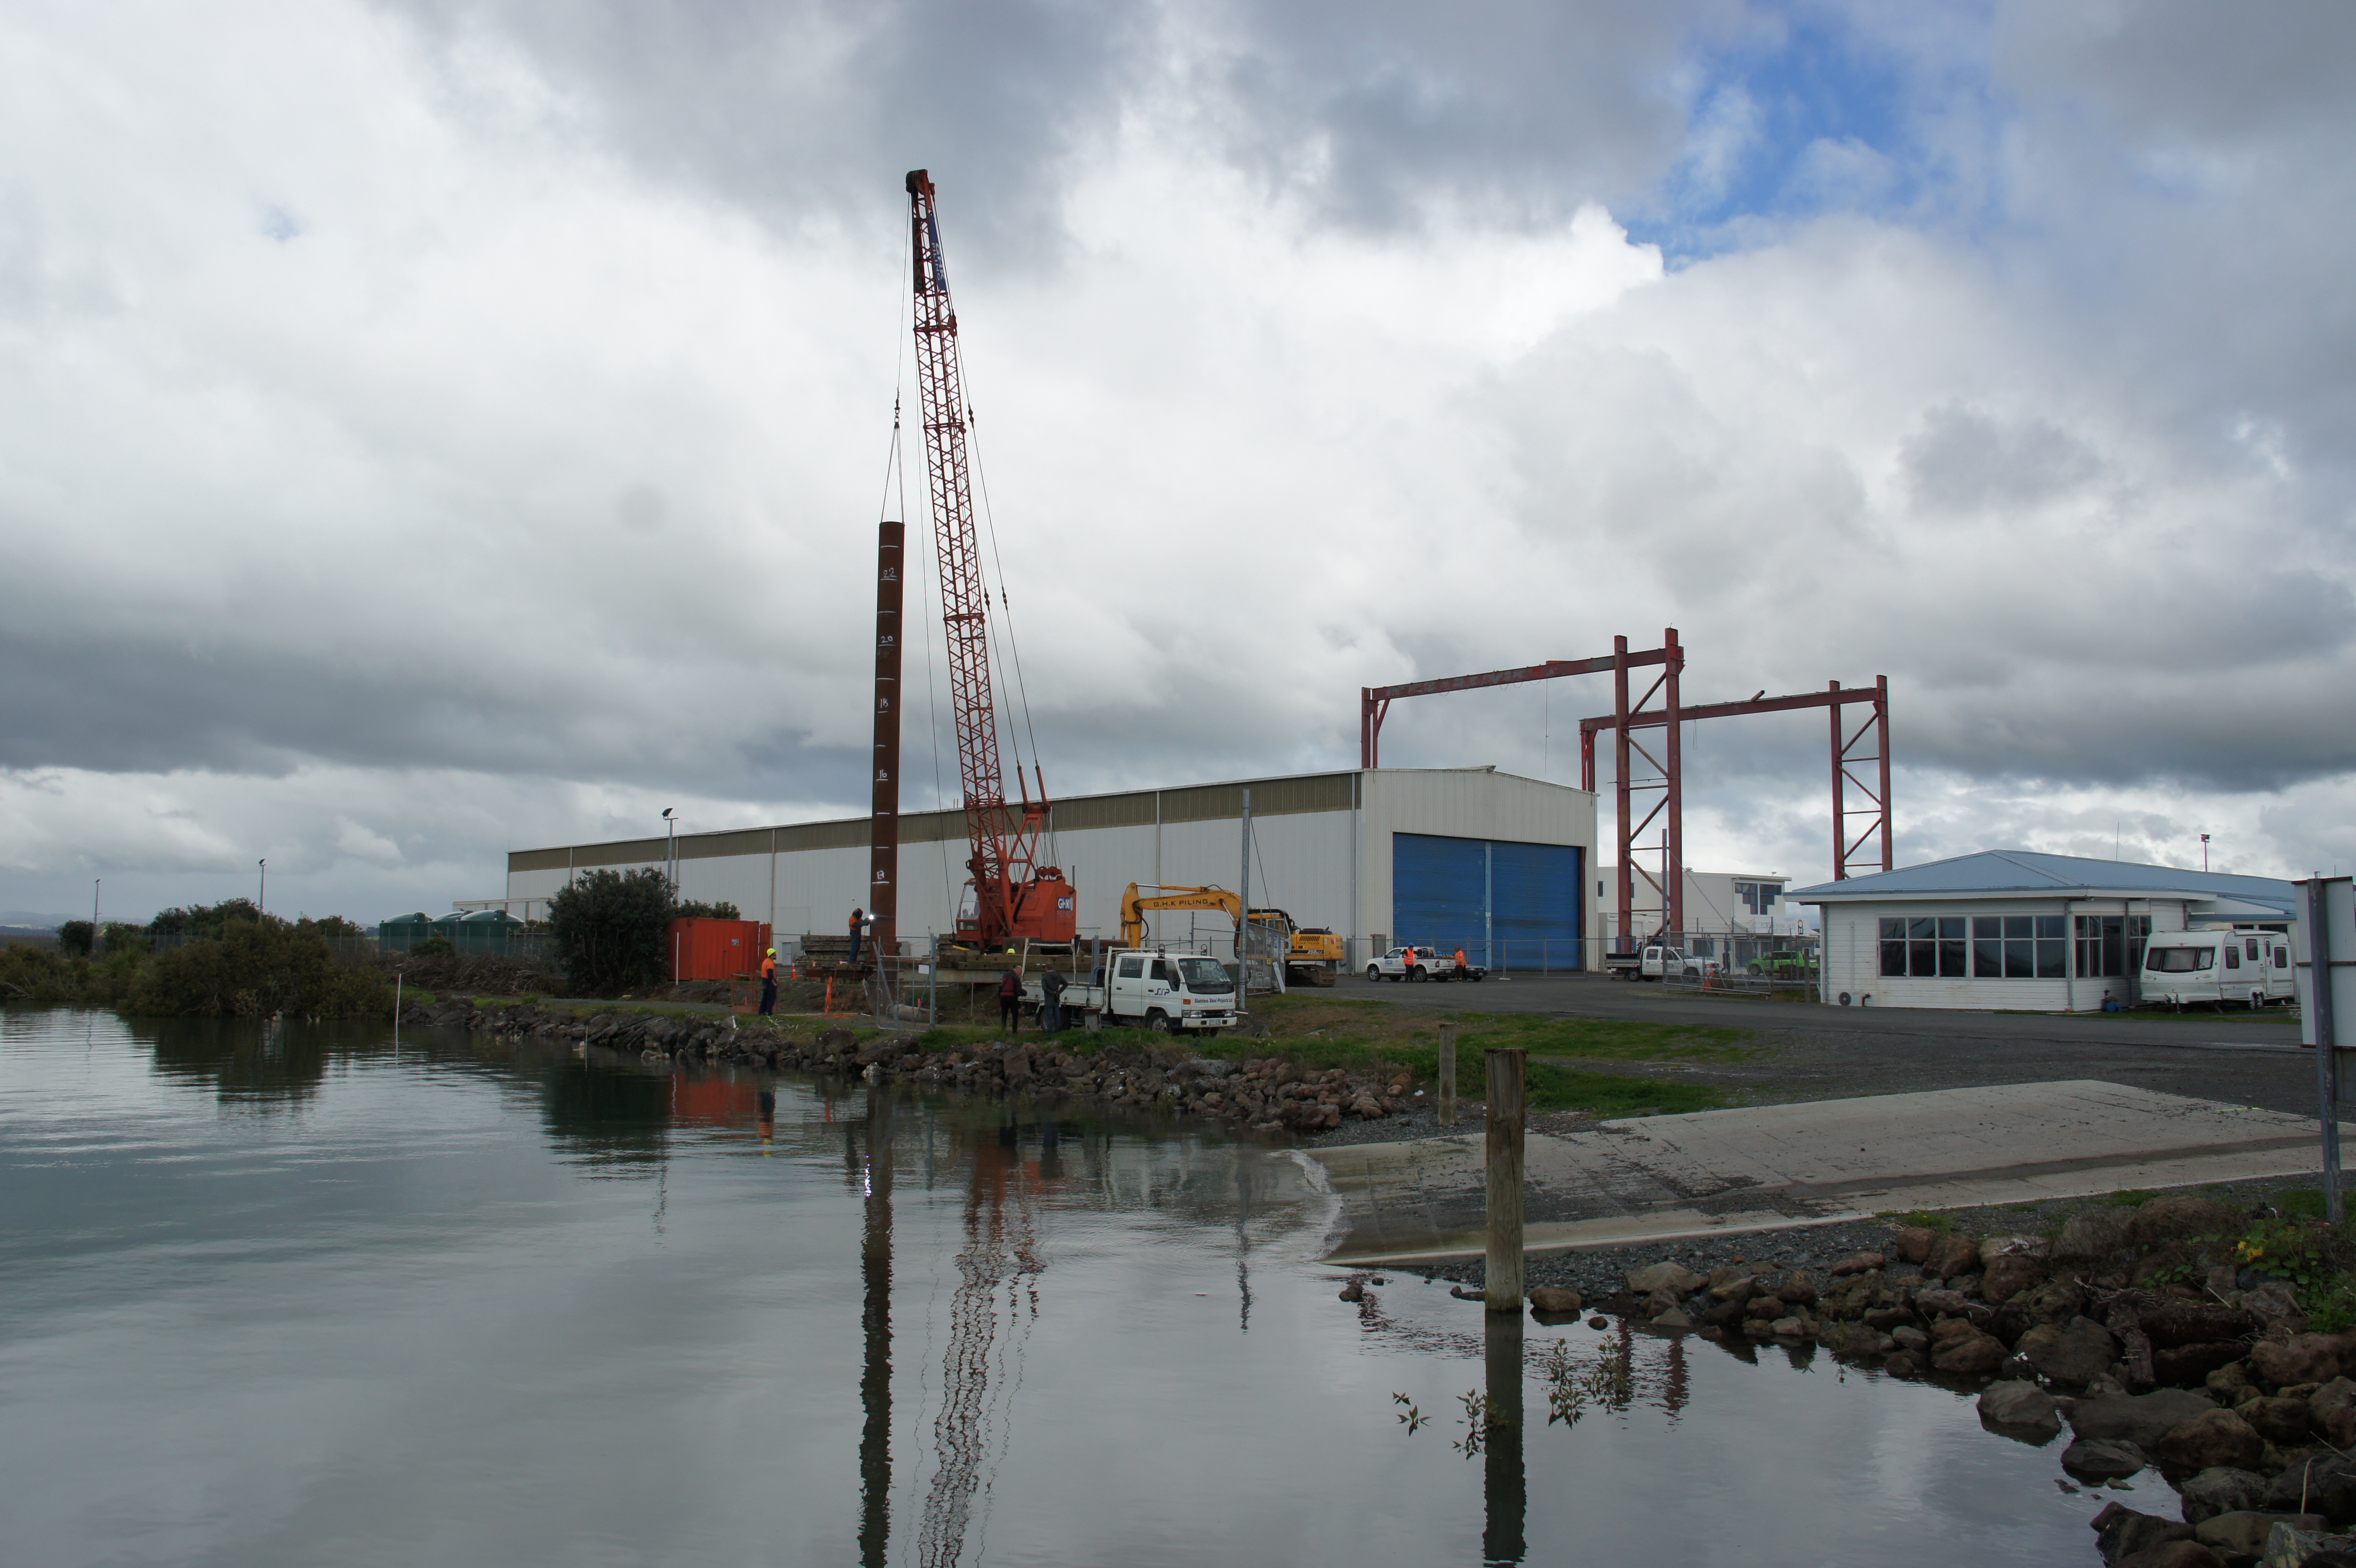 Port Whangarei Marine Centre, South Shipyard, Port Whangarei, New Zealand - 1st Pile goes in for 100T Travelift Piers